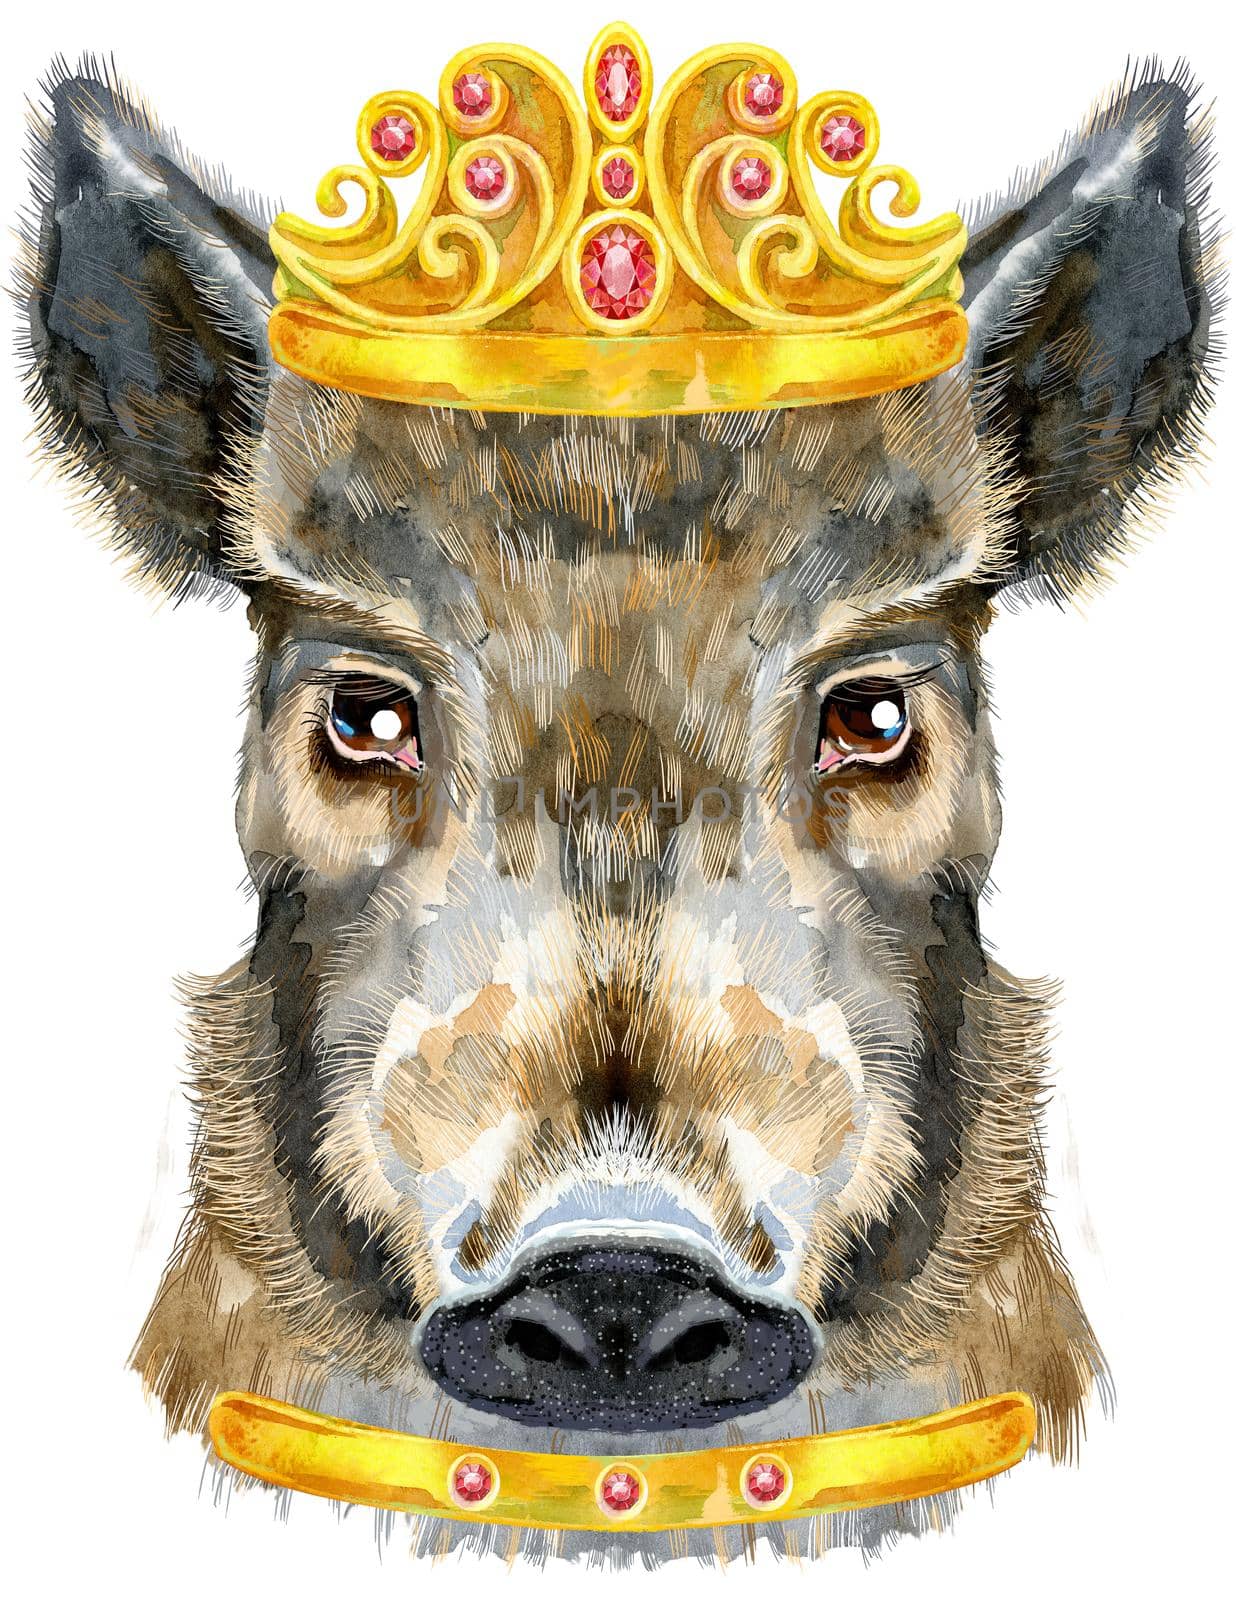 Watercolor portrait of wild boar with golden crown by NataOmsk